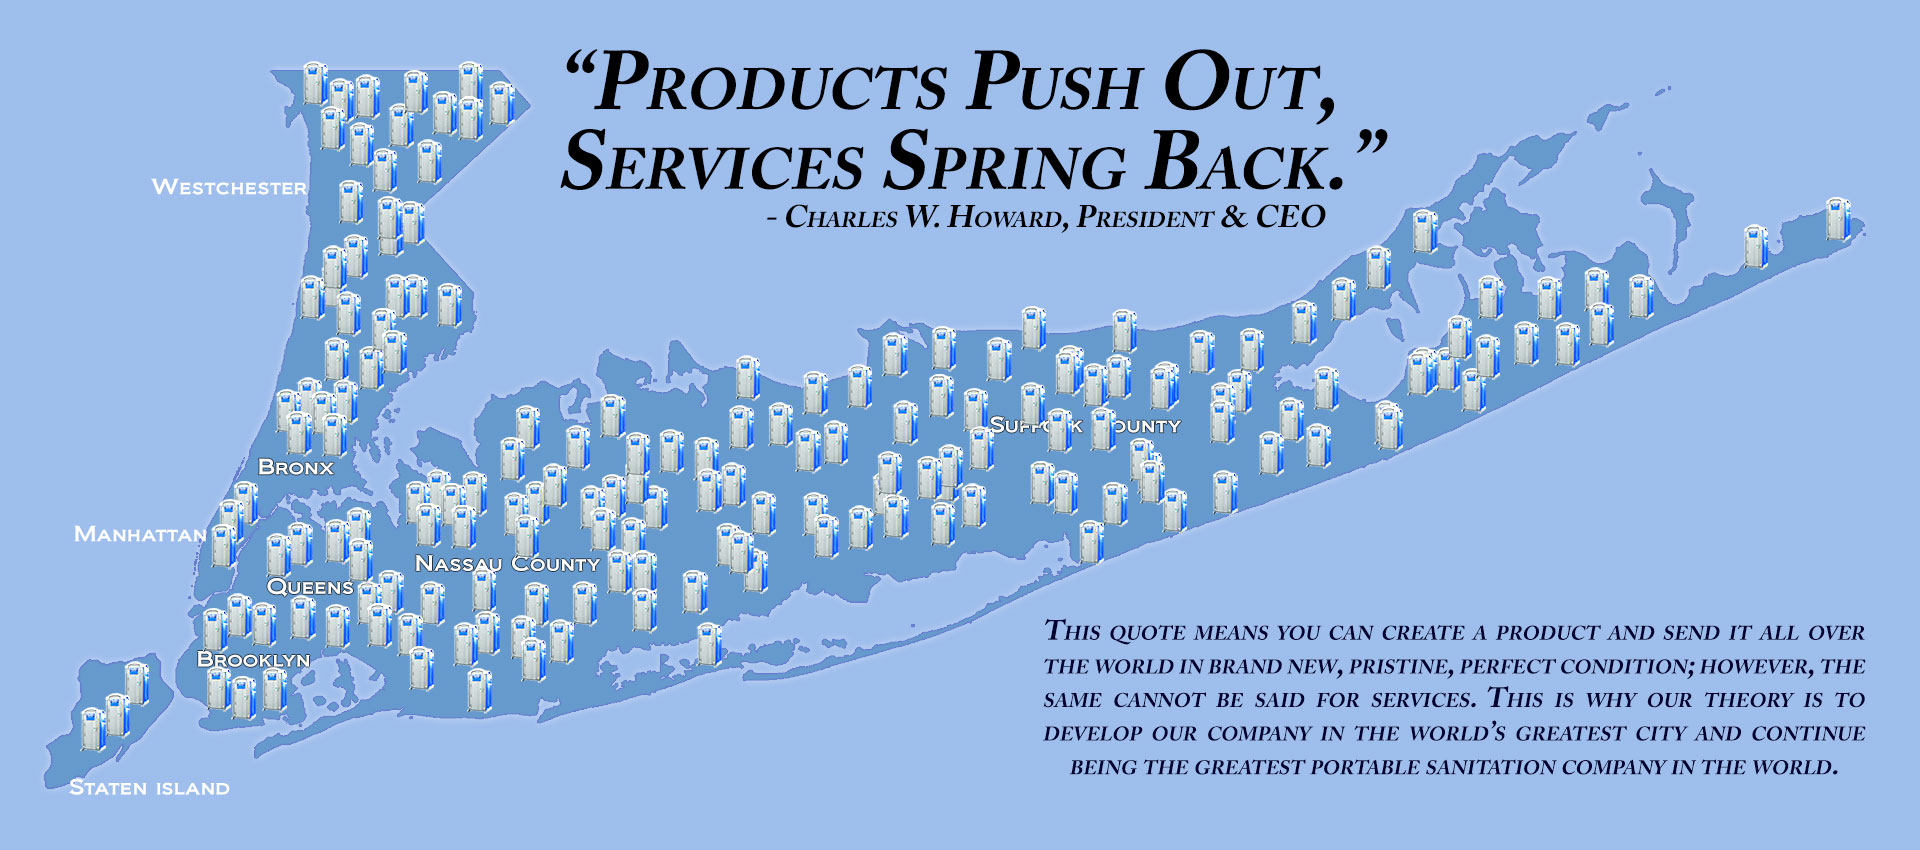 Products Push Out, Services Spring Back- Charles W. Howard, President and CEO